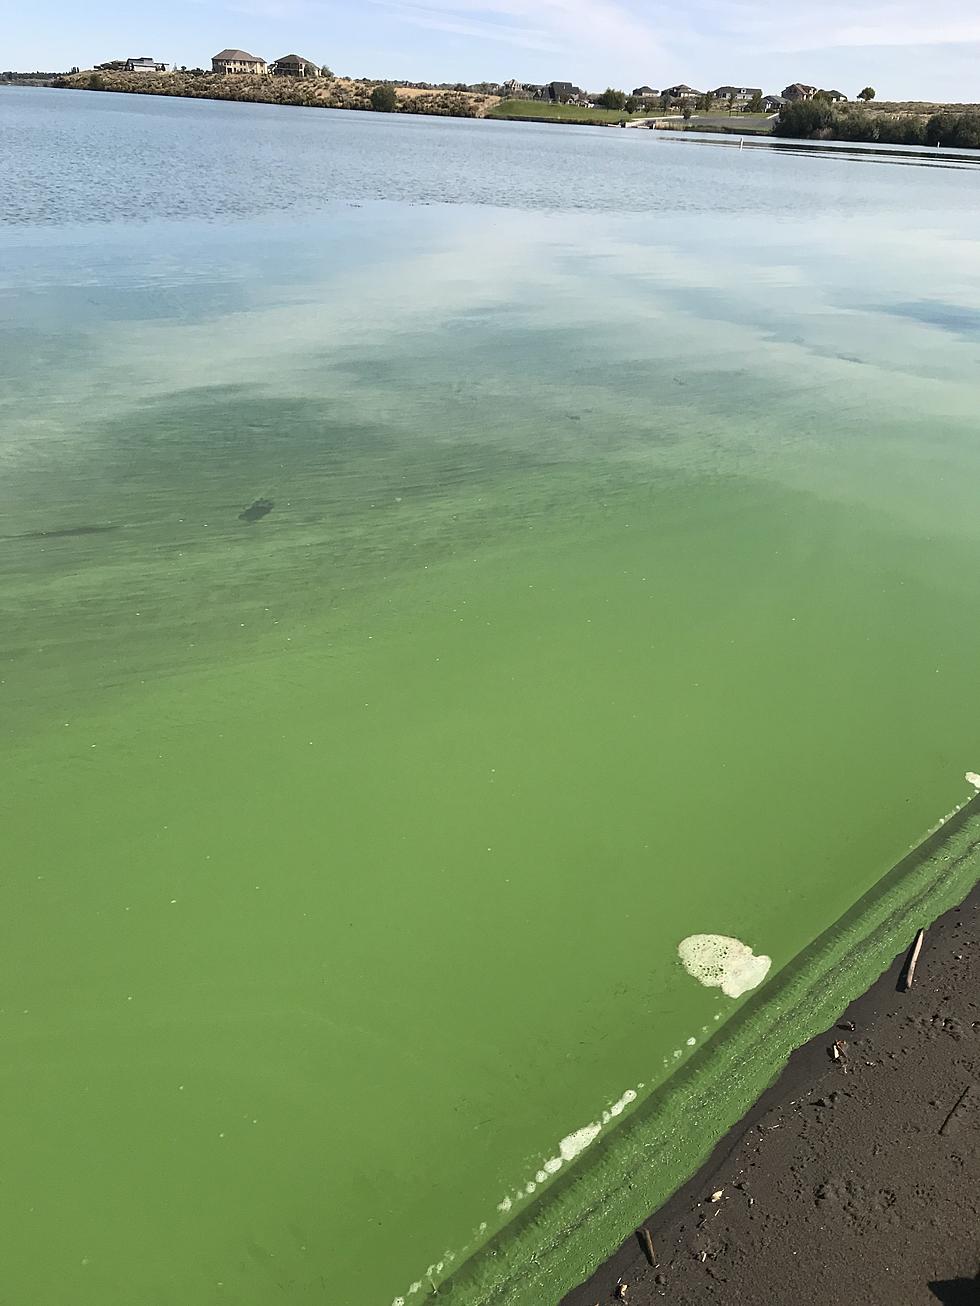 Toxic Algae Found in Lake &#8211; Officials Say Stay Away Until Clear